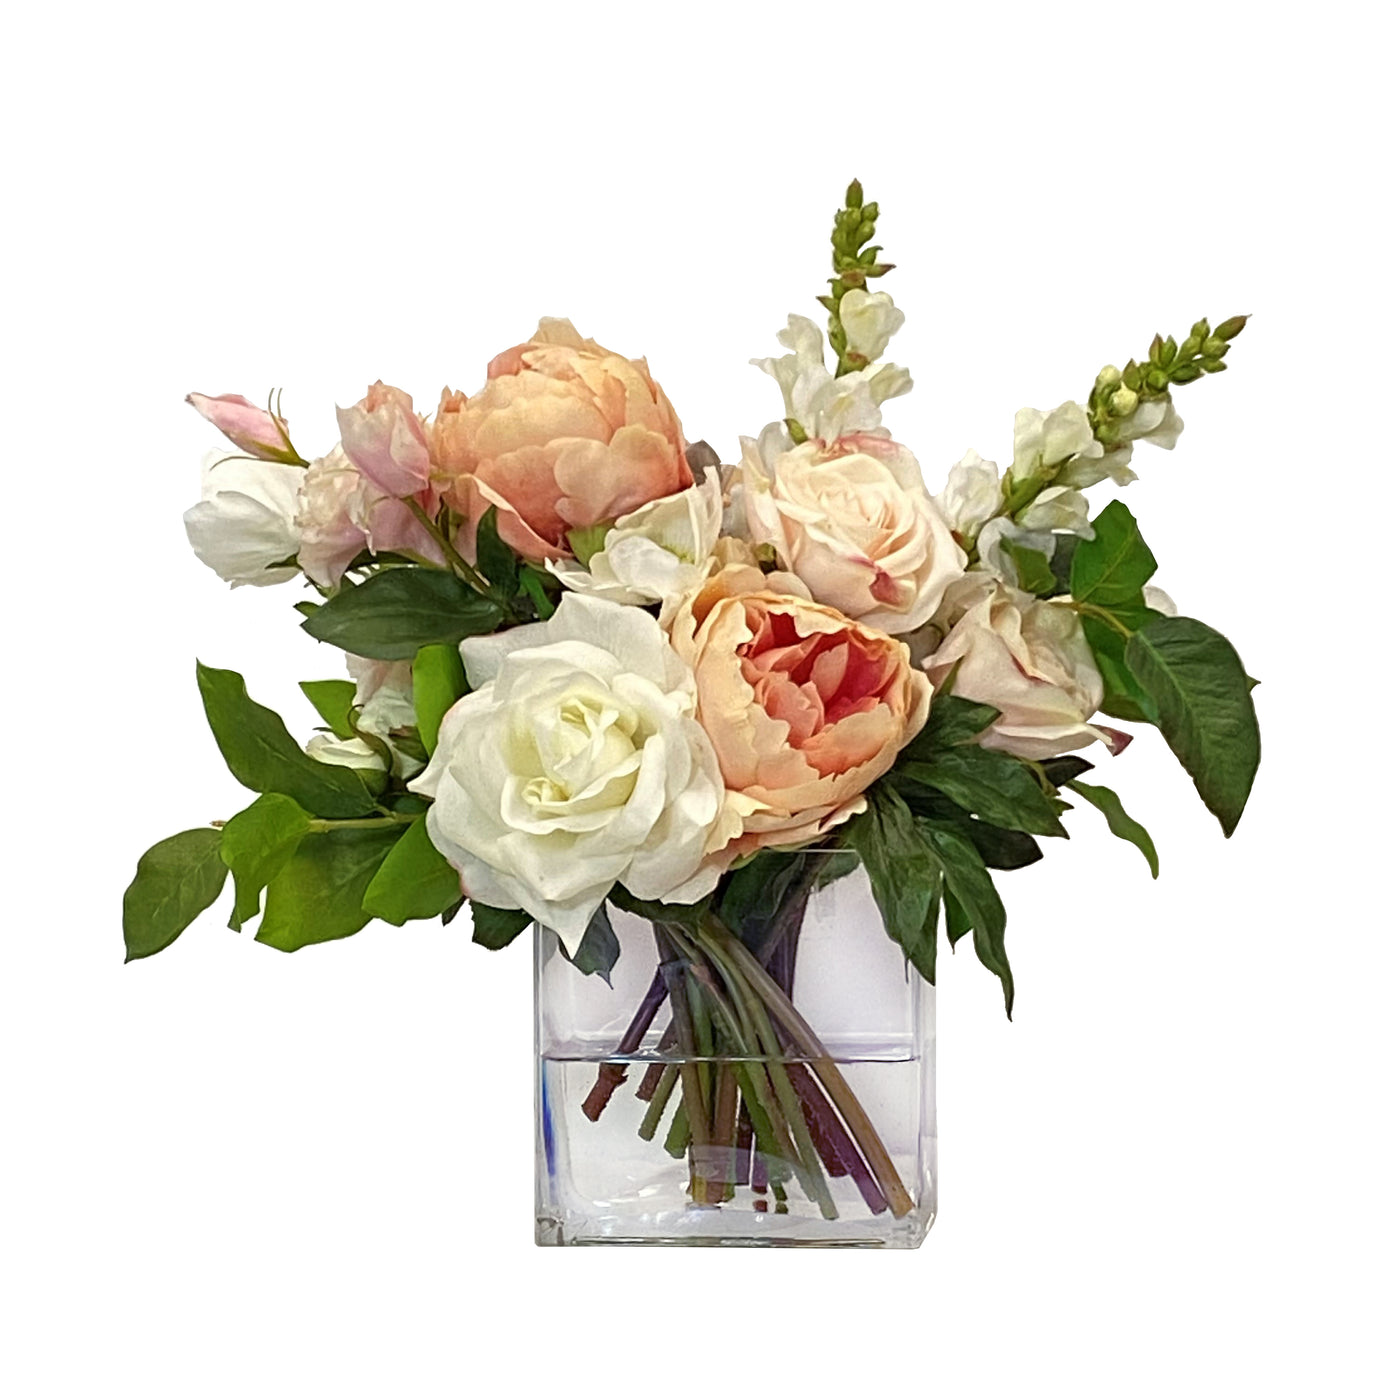 Luxury Real Touch faux flower arrangement in blush neutral set in a rectangle glass vase